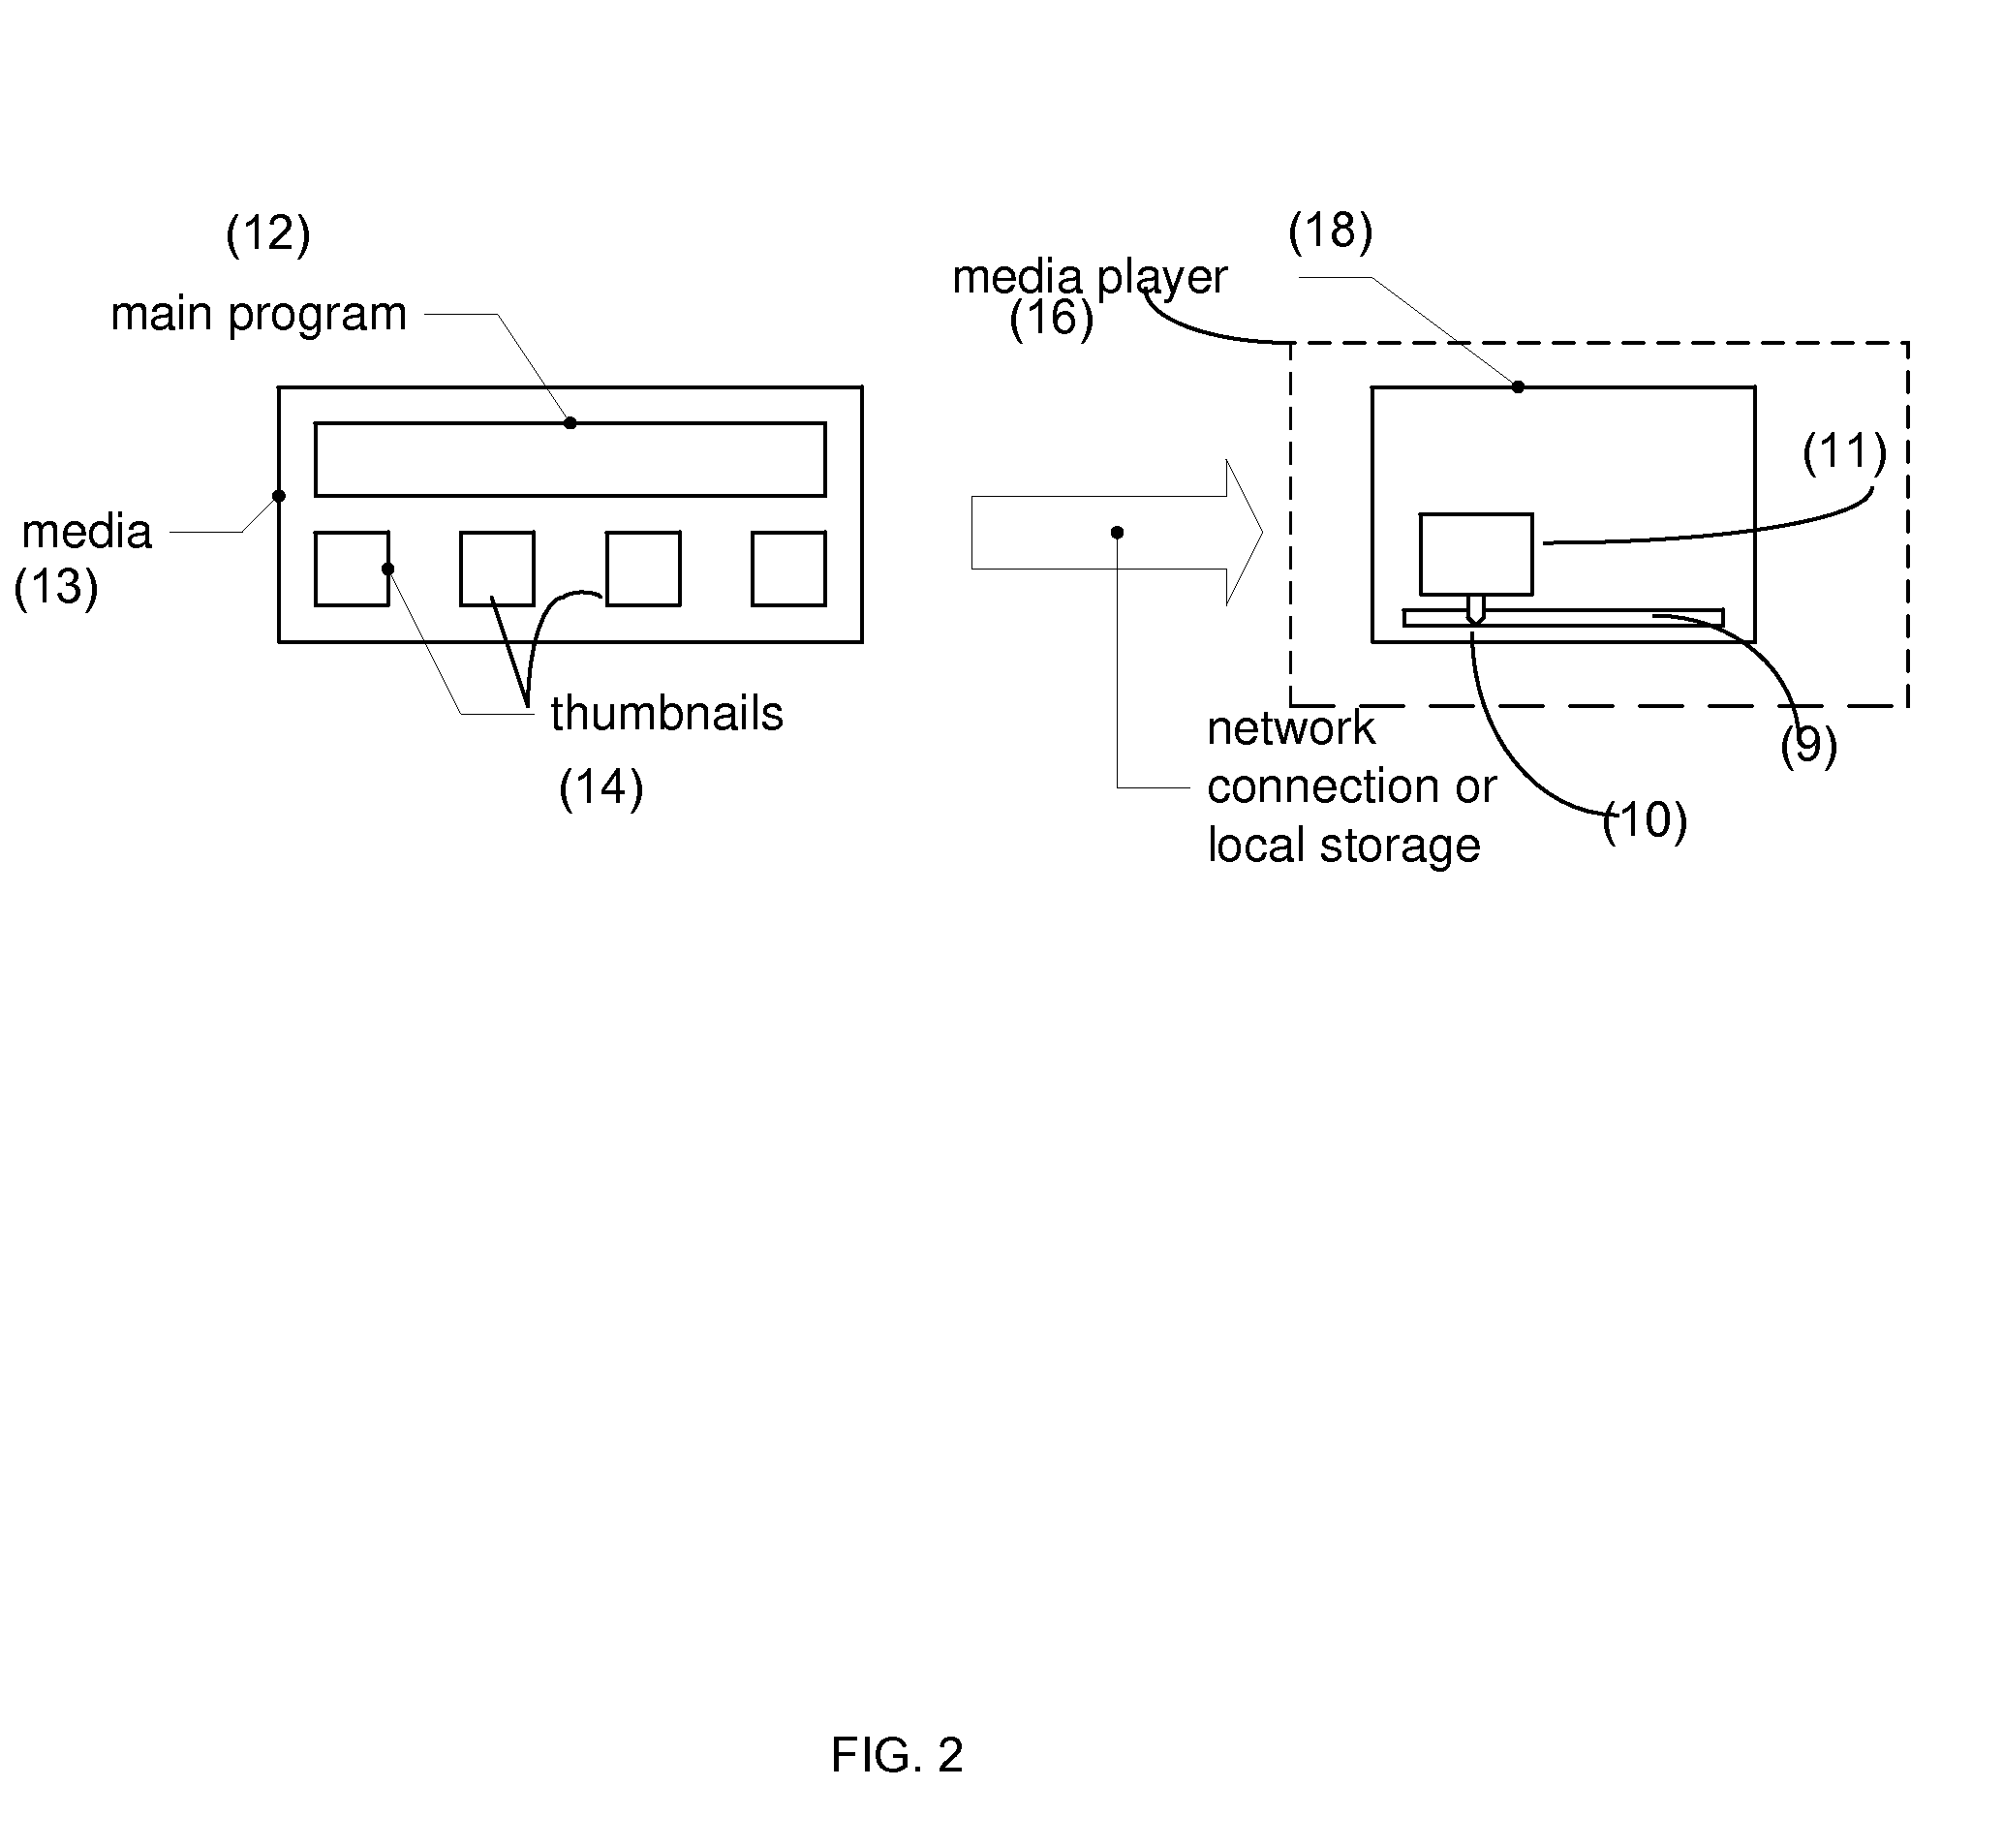 Method and system for controlling playback of a video program including by providing visual feedback of program content at a target time